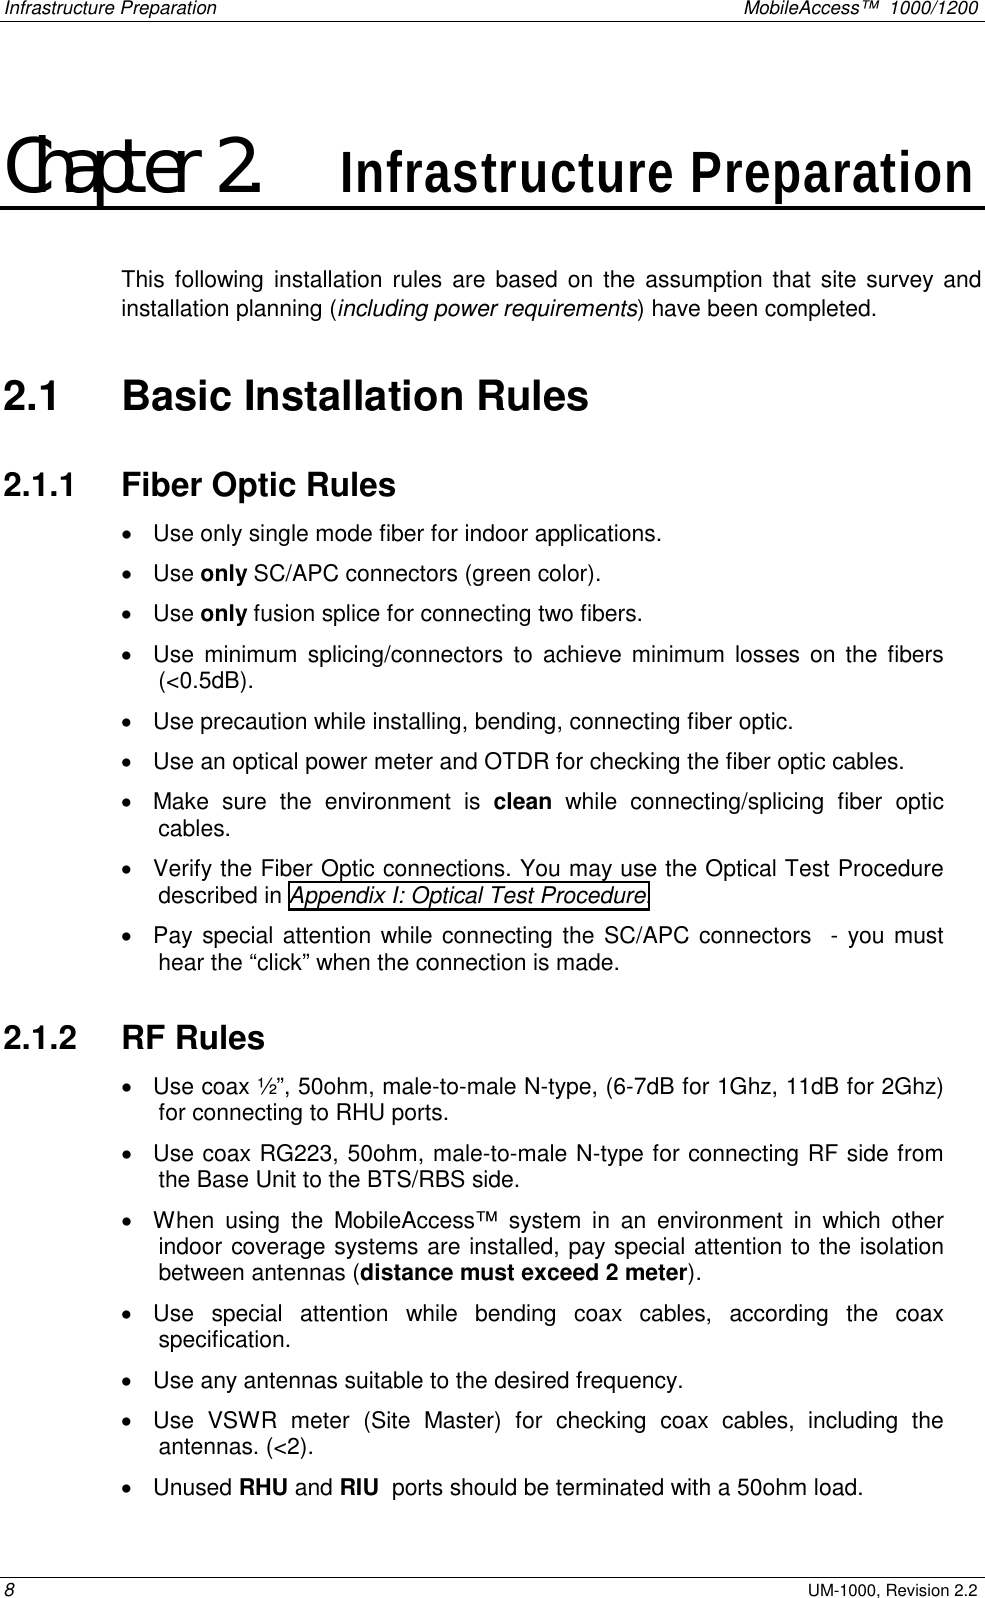 Infrastructure Preparation    MobileAccess™  1000/1200 8 UM-1000, Revision 2.2 Chapter 2.    Infrastructure Preparation This following installation rules are based on the assumption that site survey and installation planning (including power requirements) have been completed.  2.1   Basic Installation Rules 2.1.1   Fiber Optic Rules •  Use only single mode fiber for indoor applications. •  Use only SC/APC connectors (green color). •  Use only fusion splice for connecting two fibers. •  Use minimum splicing/connectors to achieve minimum losses on the fibers (&lt;0.5dB). •  Use precaution while installing, bending, connecting fiber optic. •  Use an optical power meter and OTDR for checking the fiber optic cables. •  Make sure the environment is clean while connecting/splicing fiber optic cables.  •  Verify the Fiber Optic connections. You may use the Optical Test Procedure described in Appendix I: Optical Test Procedure. •  Pay special attention while connecting the SC/APC connectors  - you must hear the “click” when the connection is made. 2.1.2   RF Rules •  Use coax ½”, 50ohm, male-to-male N-type, (6-7dB for 1Ghz, 11dB for 2Ghz) for connecting to RHU ports. •  Use coax RG223, 50ohm, male-to-male N-type for connecting RF side from the Base Unit to the BTS/RBS side. •  When using the MobileAccess™ system in an environment in which other indoor coverage systems are installed, pay special attention to the isolation between antennas (distance must exceed 2 meter). •  Use special attention while bending coax cables, according the coax specification. •  Use any antennas suitable to the desired frequency. •  Use VSWR meter (Site Master) for checking coax cables, including the antennas. (&lt;2). •  Unused RHU and RIU  ports should be terminated with a 50ohm load.   